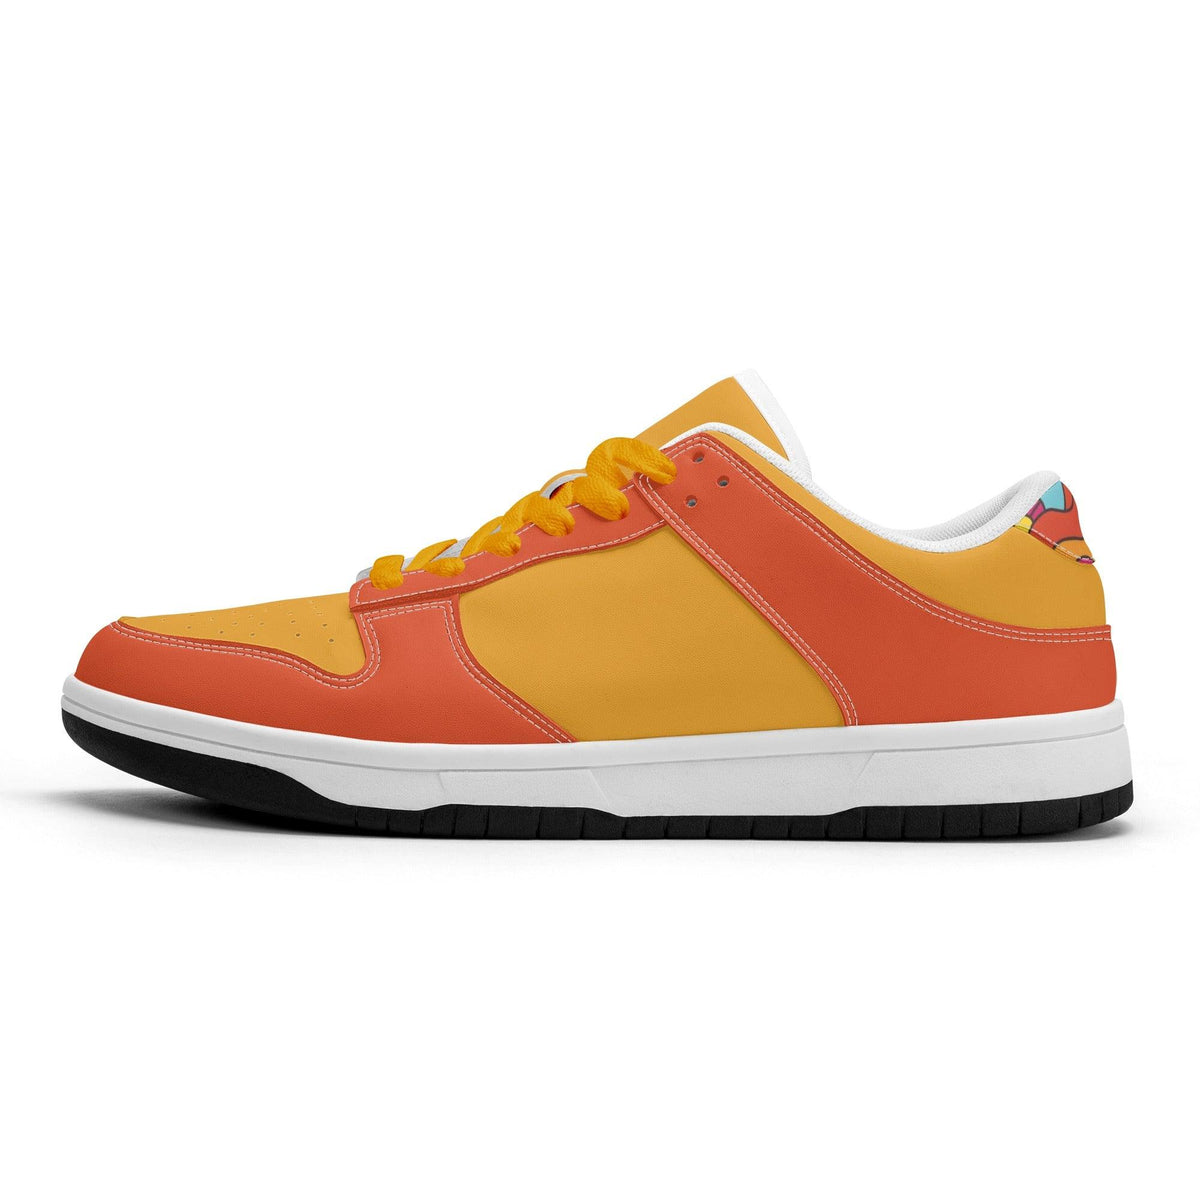 Inela Two-color Low Top Sneakers - Yellow Orange Women's Retro Faux Leather Color Block Funky Bold Vibrant Multi-color